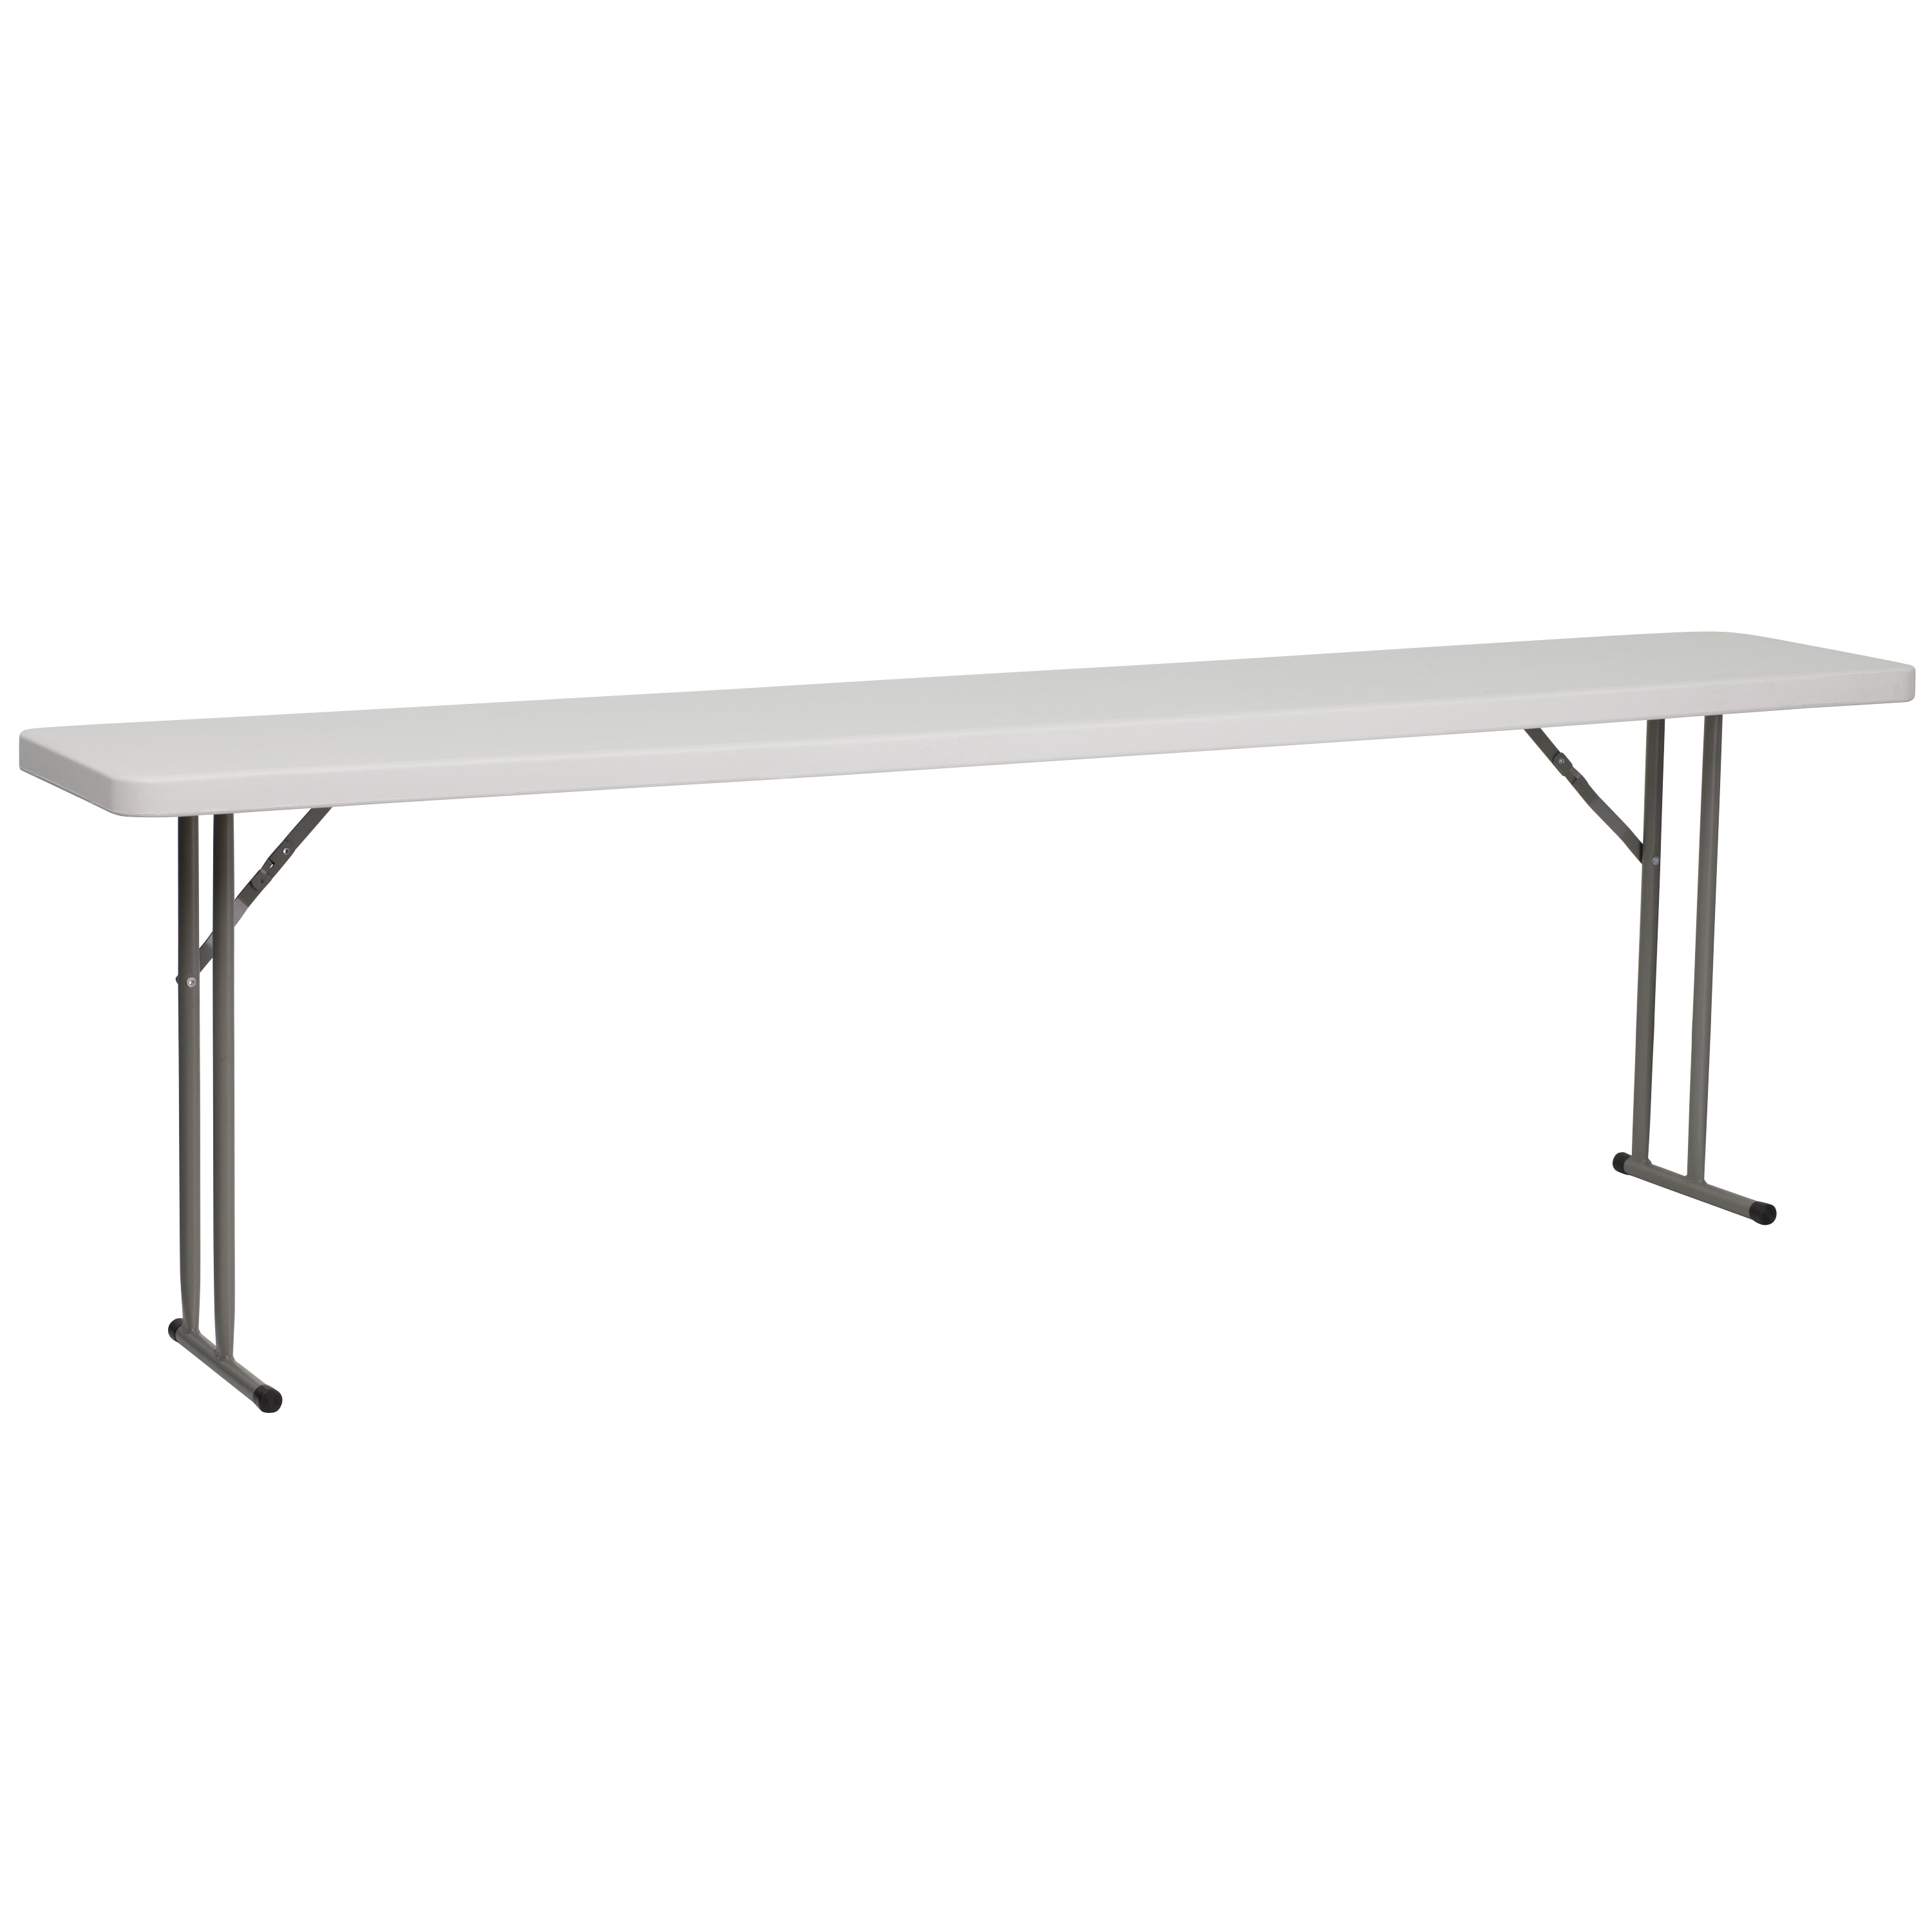 White Folding Banquet Table, How Big Is A 8ft Rectangular Table